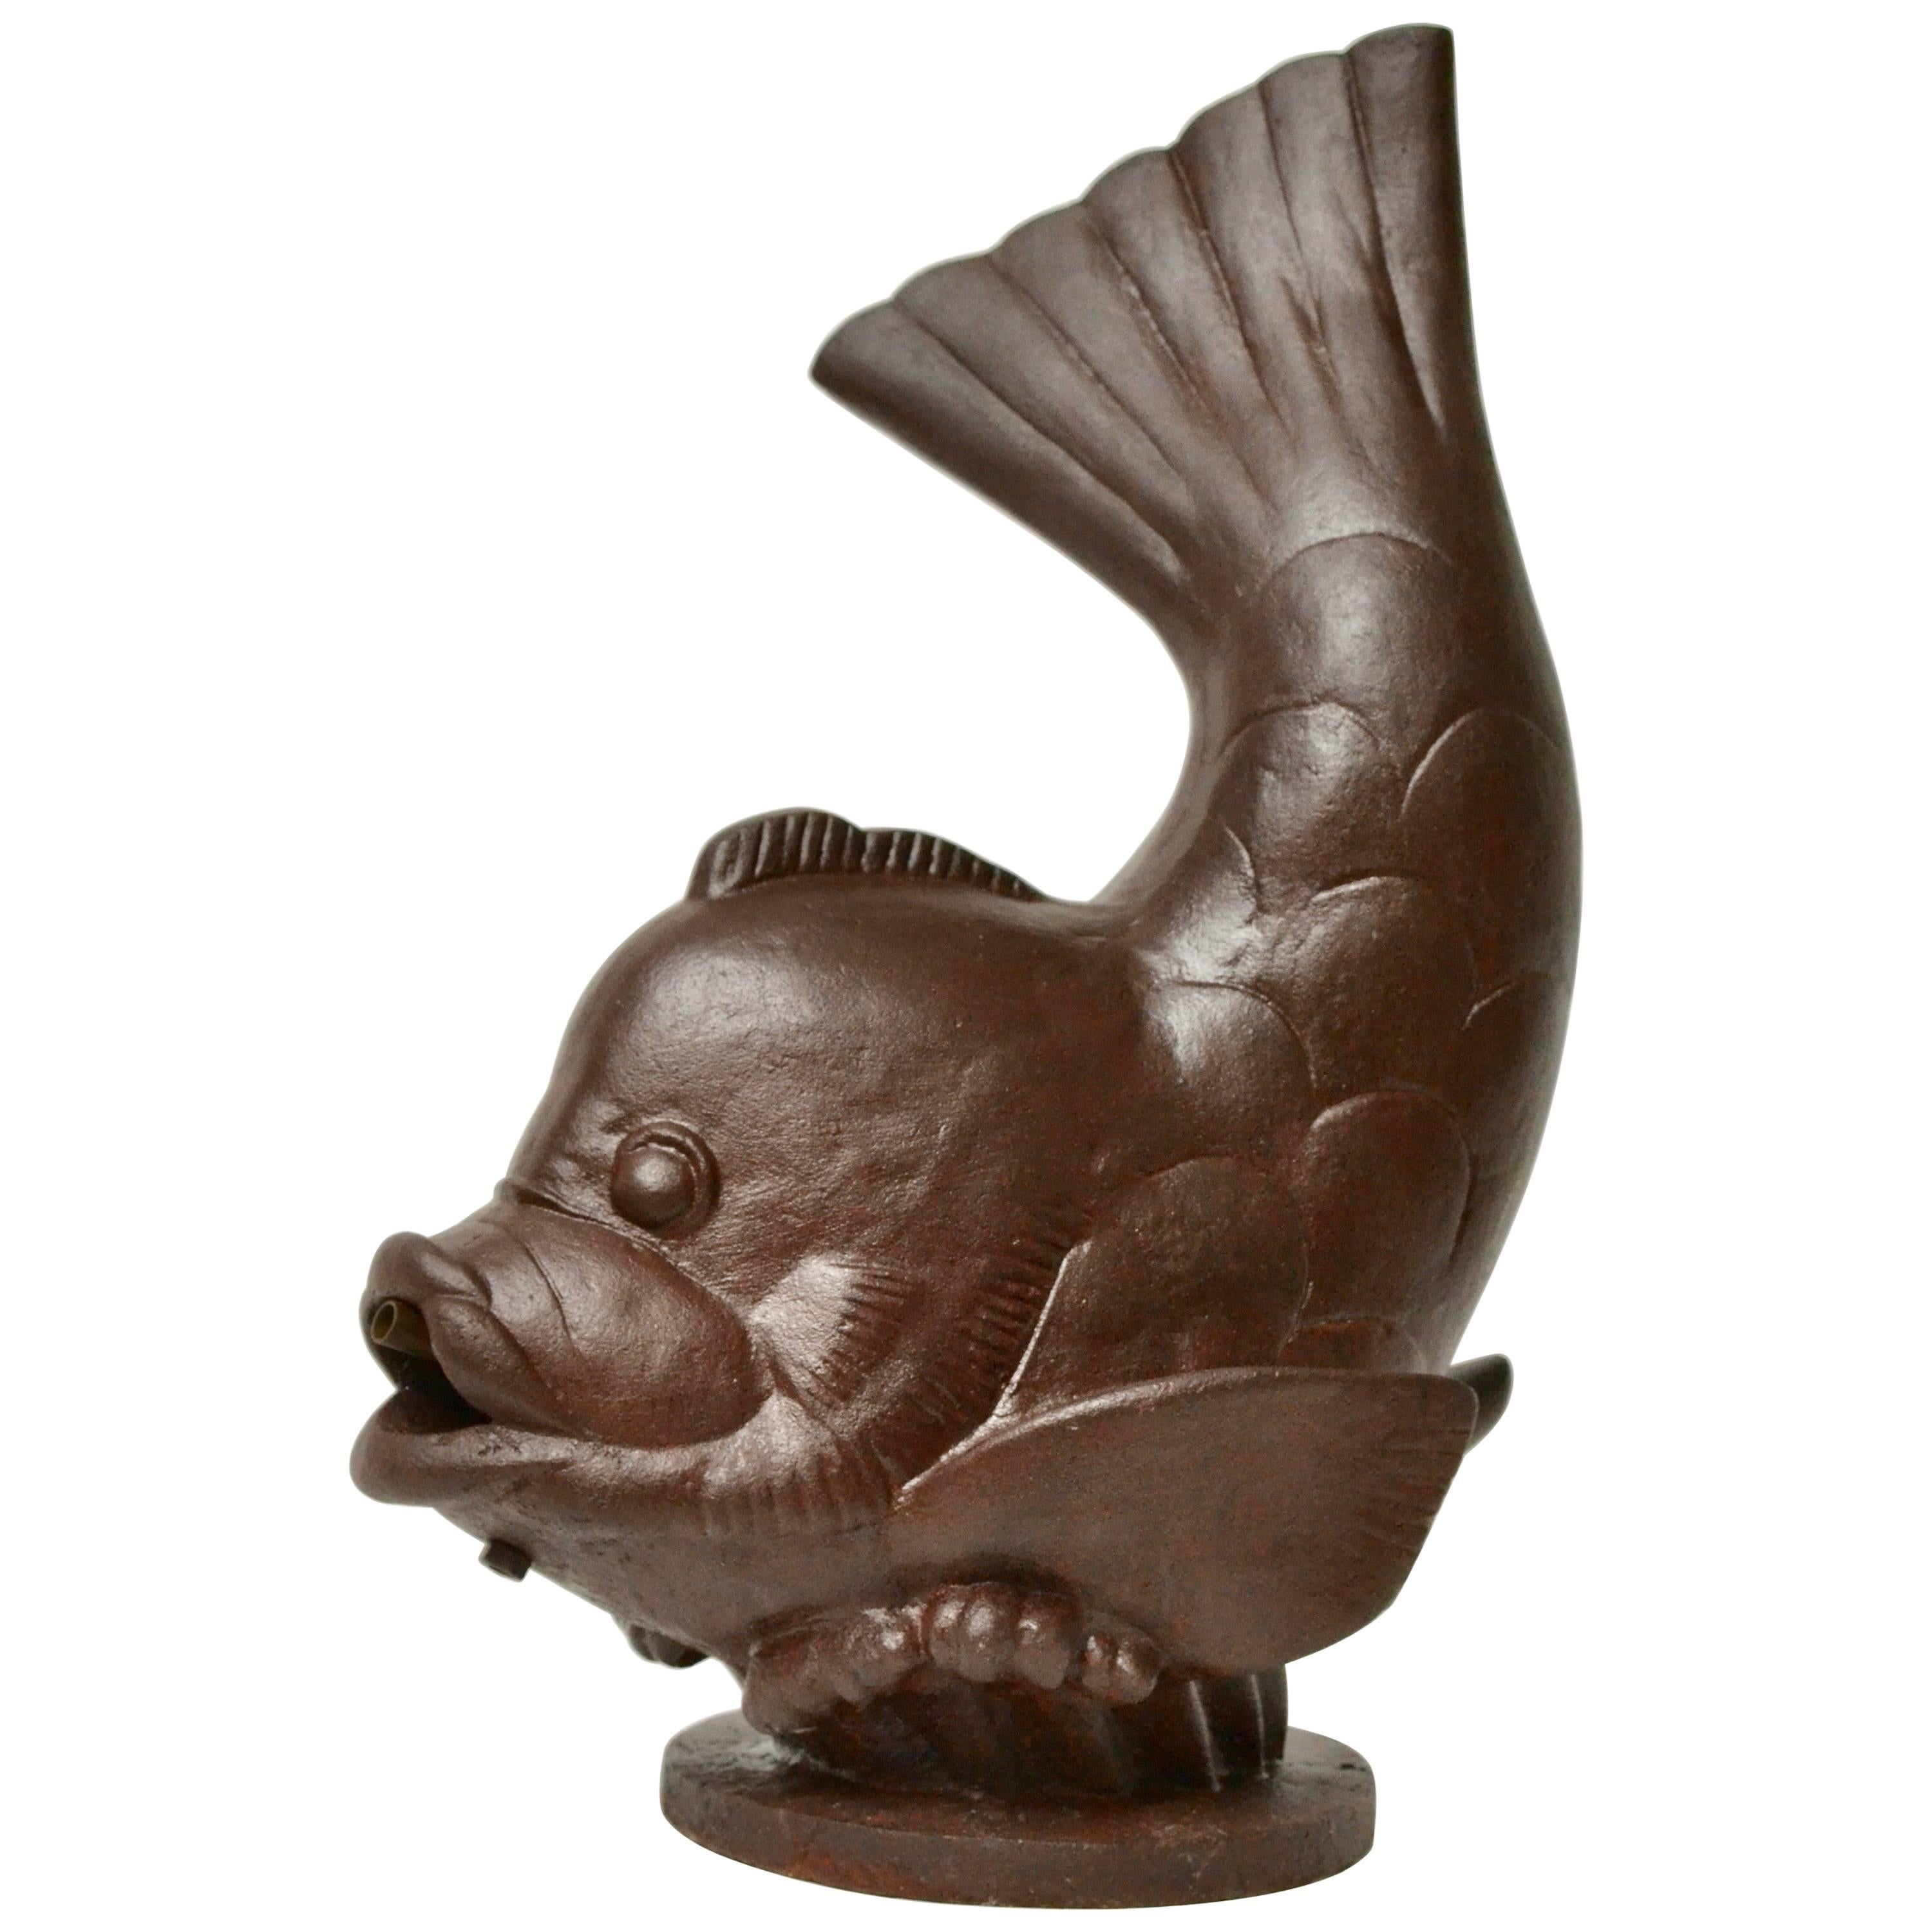 Swedish Cast-Iron Fountain "FISK" from Näfveqvarns Bruk and Designed by Carl O